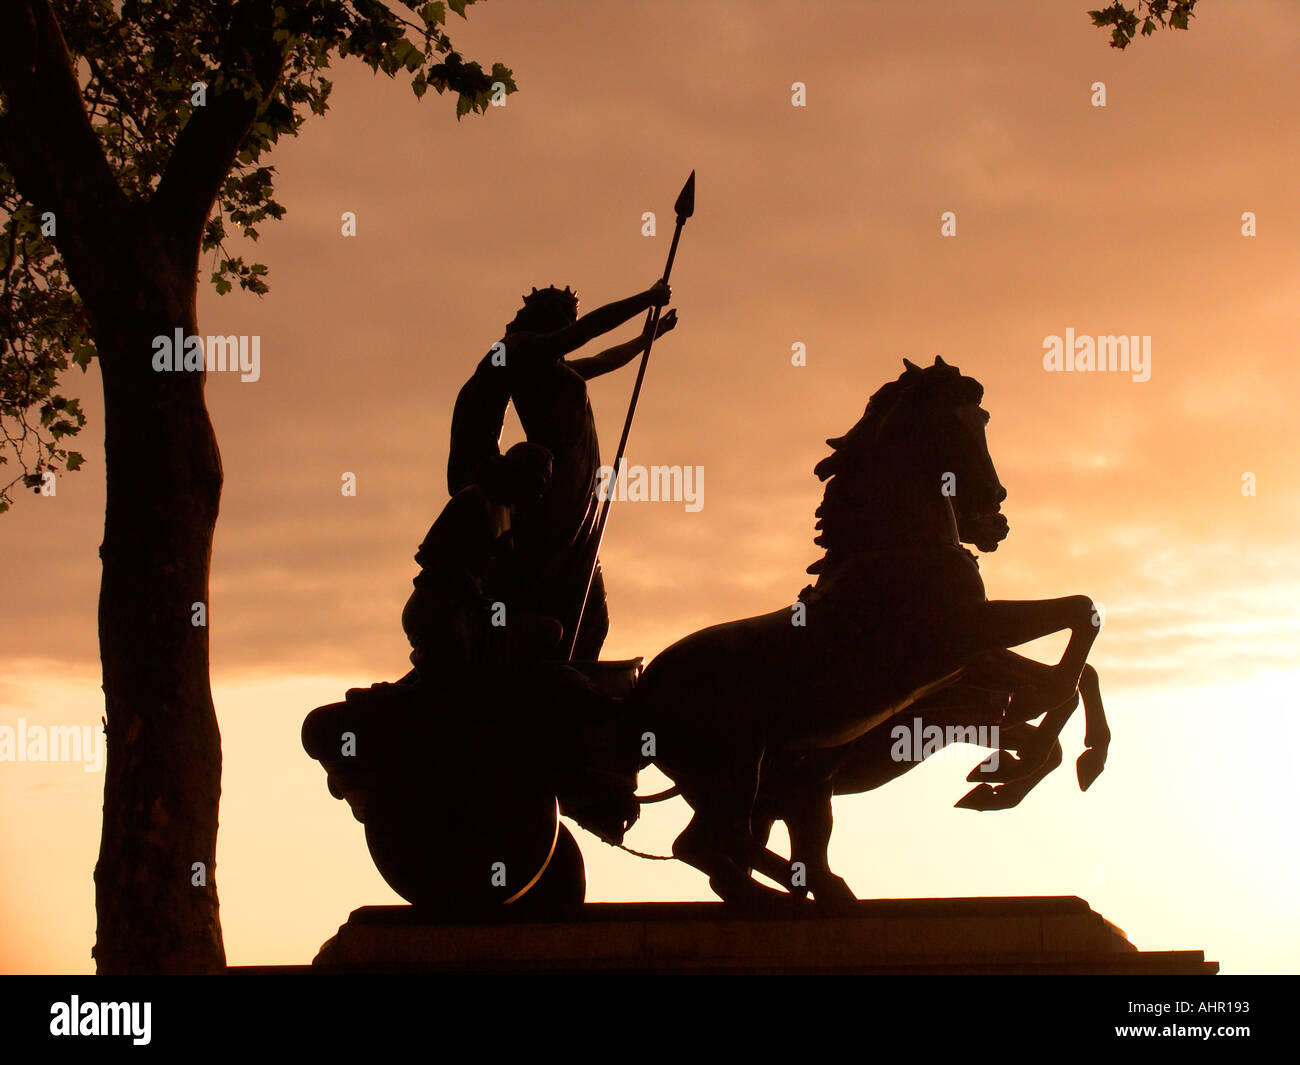 Boadicea Queen of the Iceni statue City of Westminster London England UK in back Stock Photo